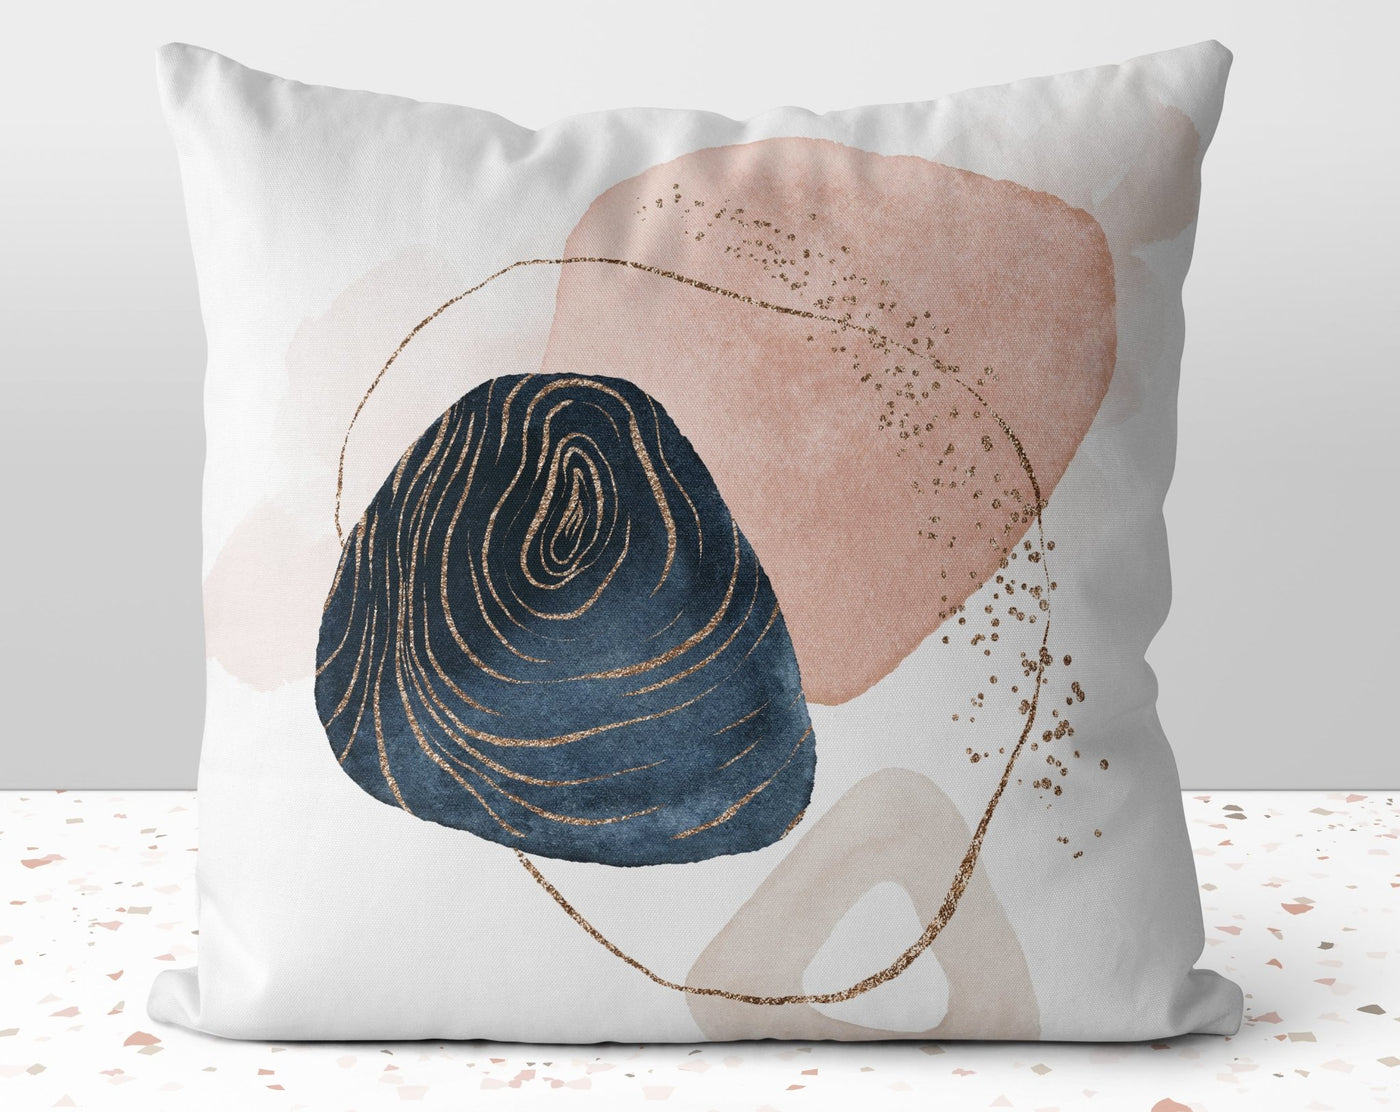 Chic Glam Circular Shapes Blue Pink Square Pillow with Gold Printed Accents with Cover Throw with Insert - Cush Potato Pillows